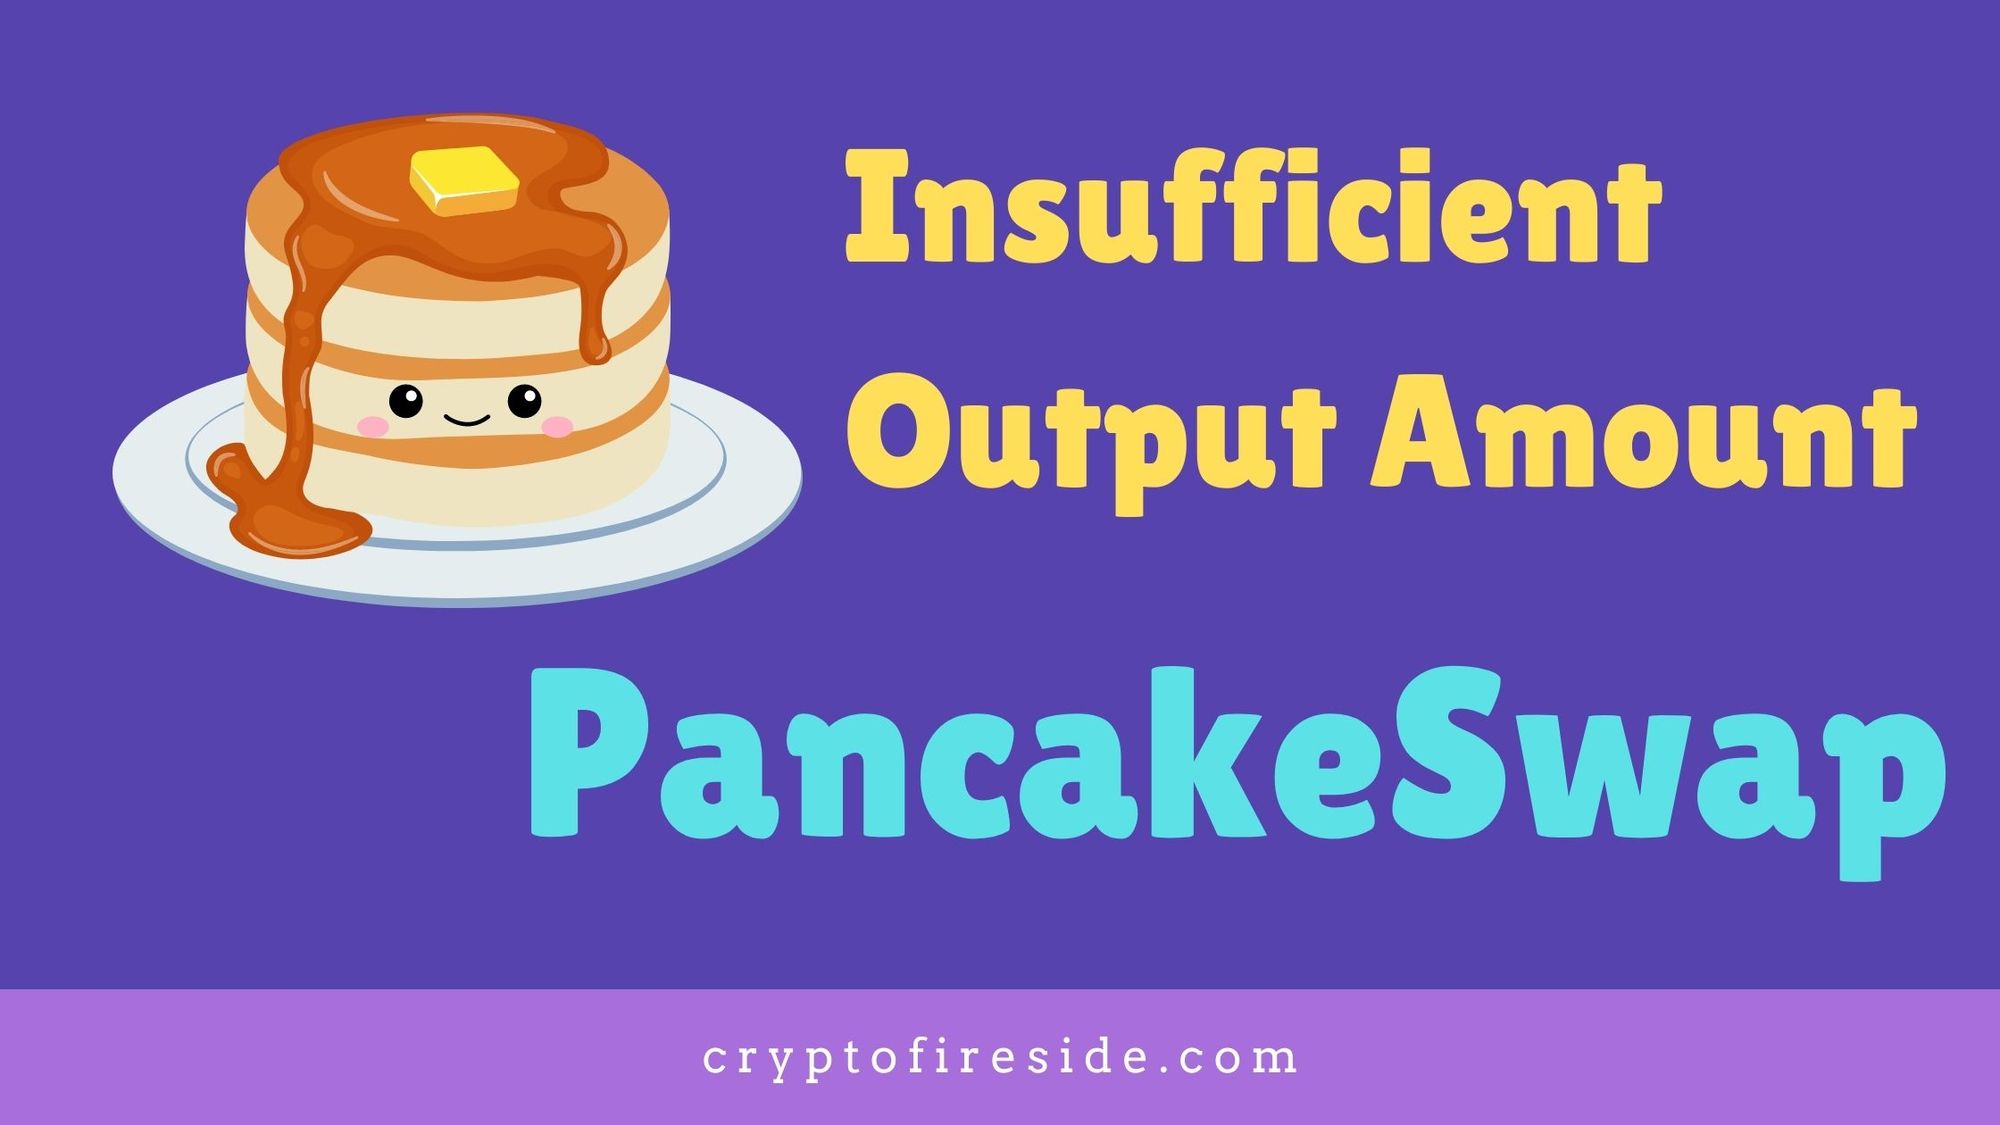 A cute picture of a pancake, purple background and words "Insufficient Output Amount PancakeSwap"